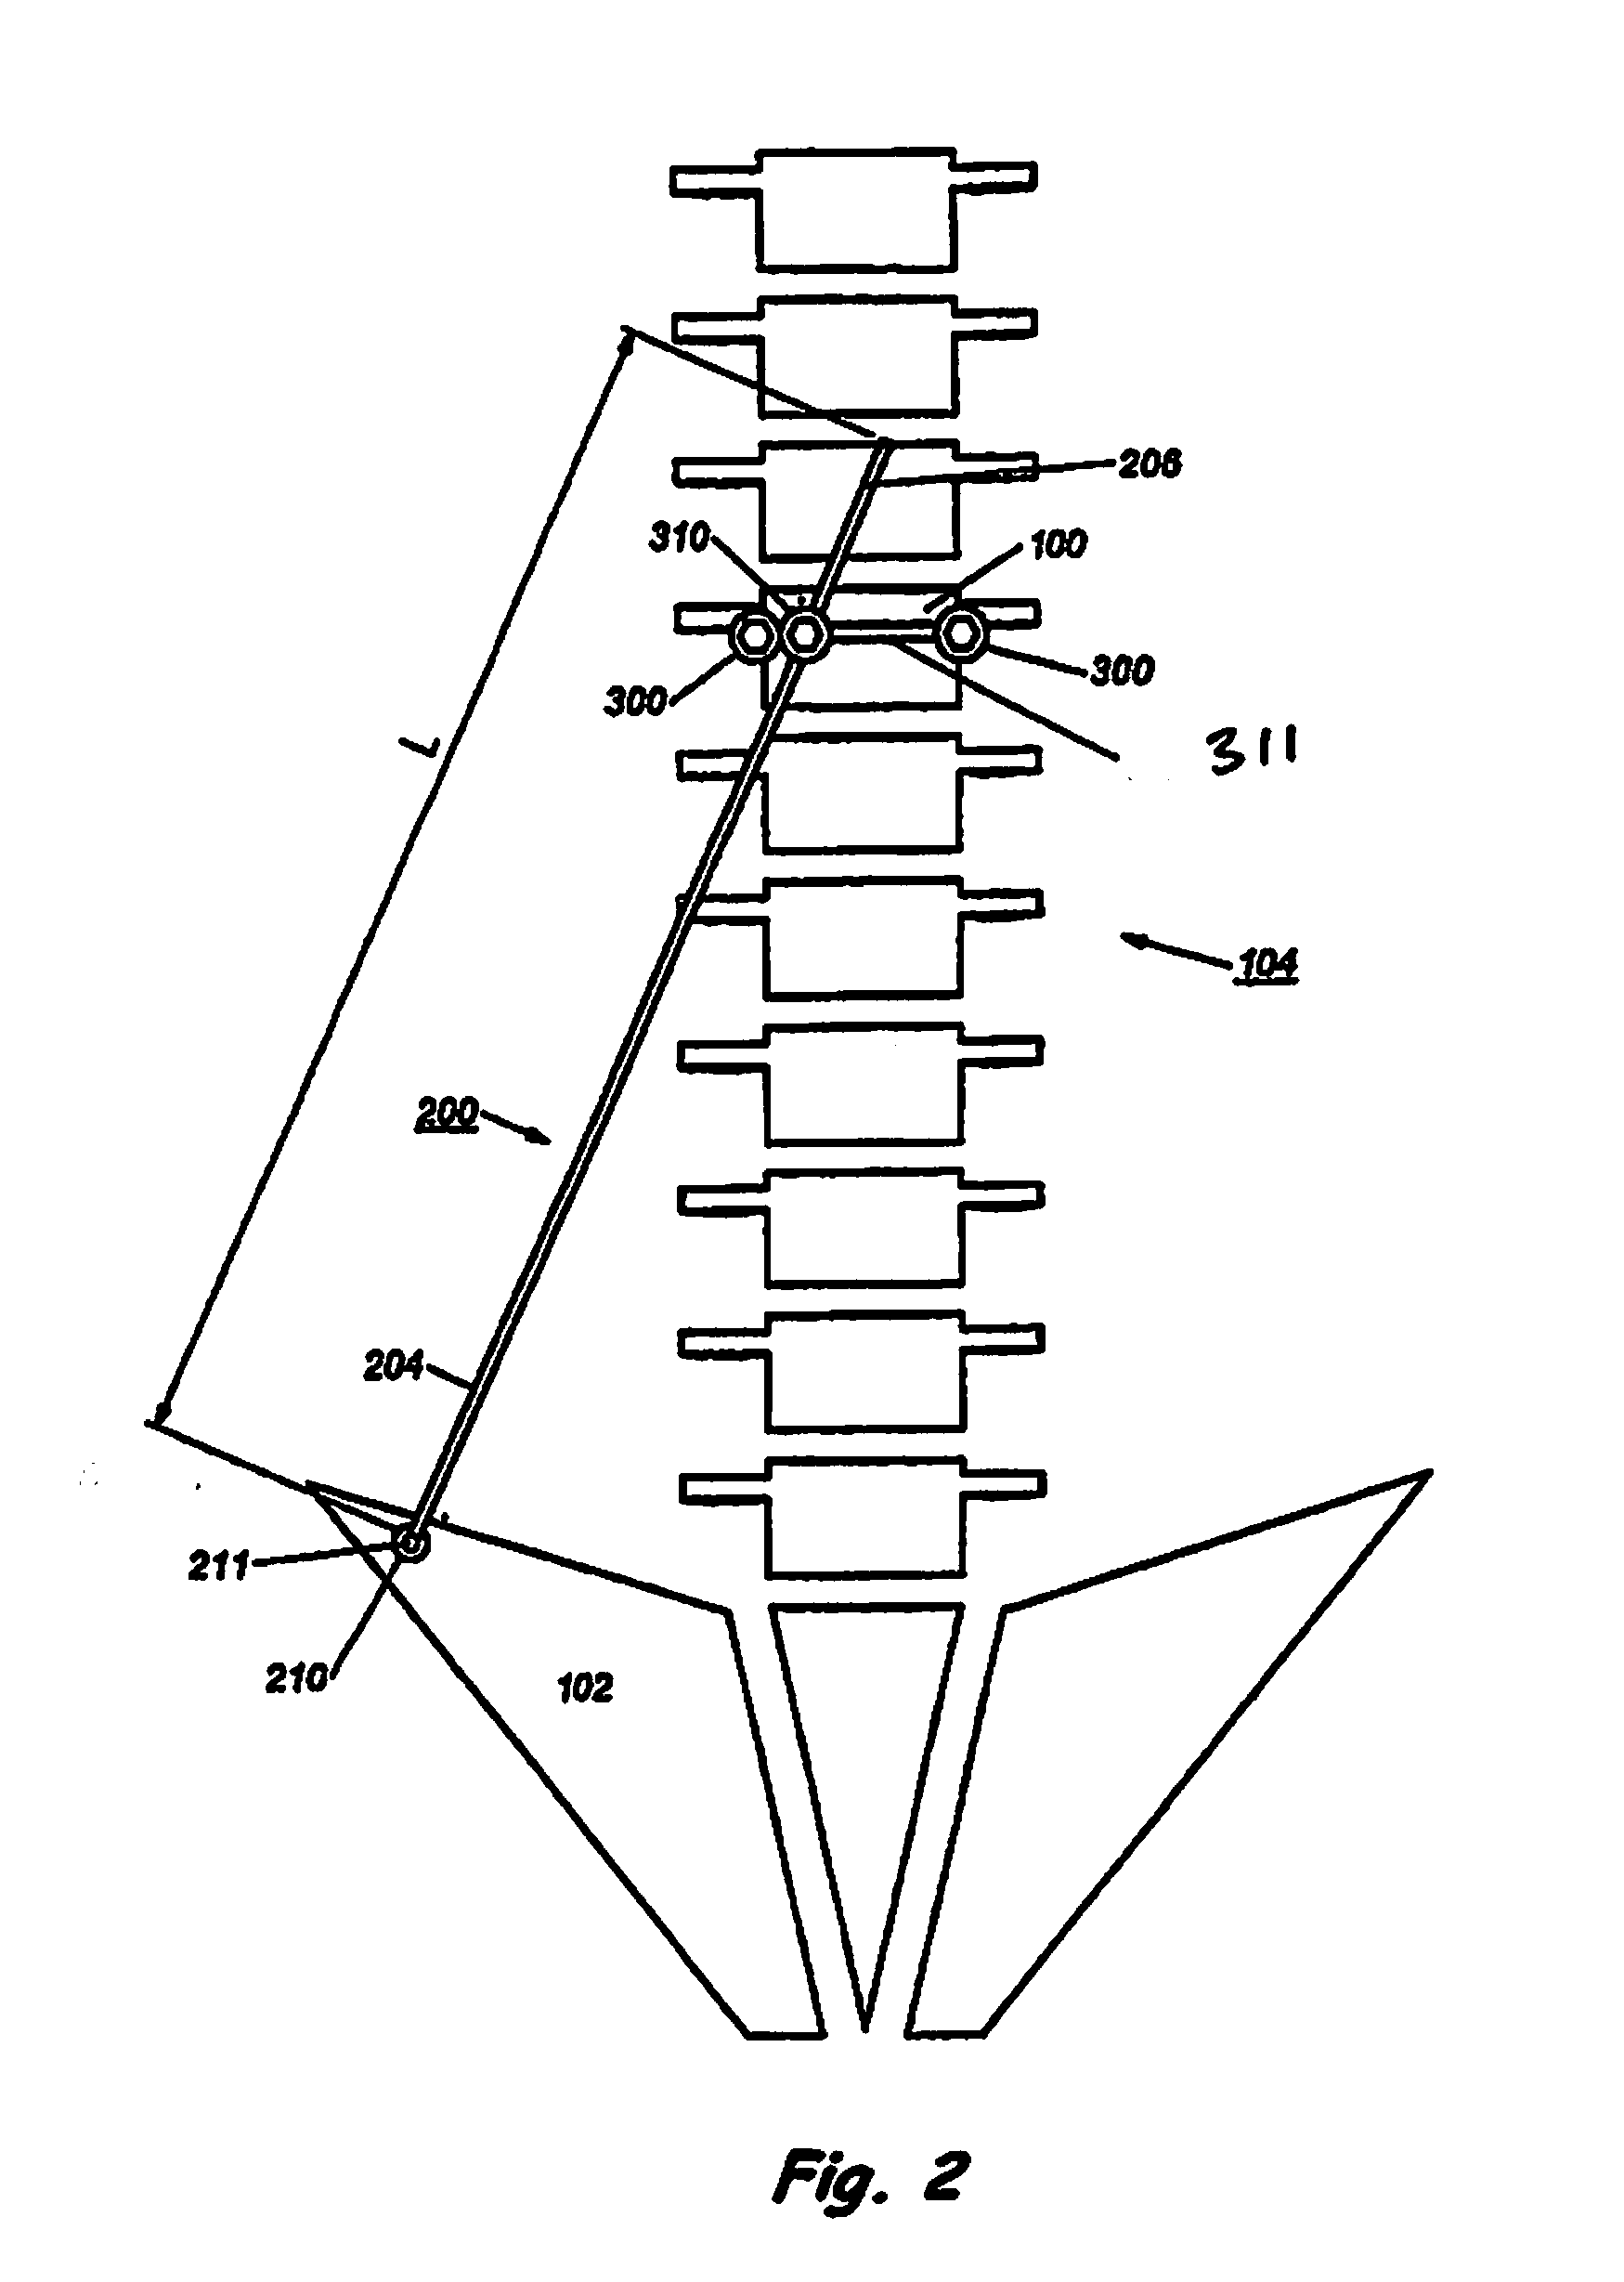 Device and Method for Treatment of Spinal Deformity